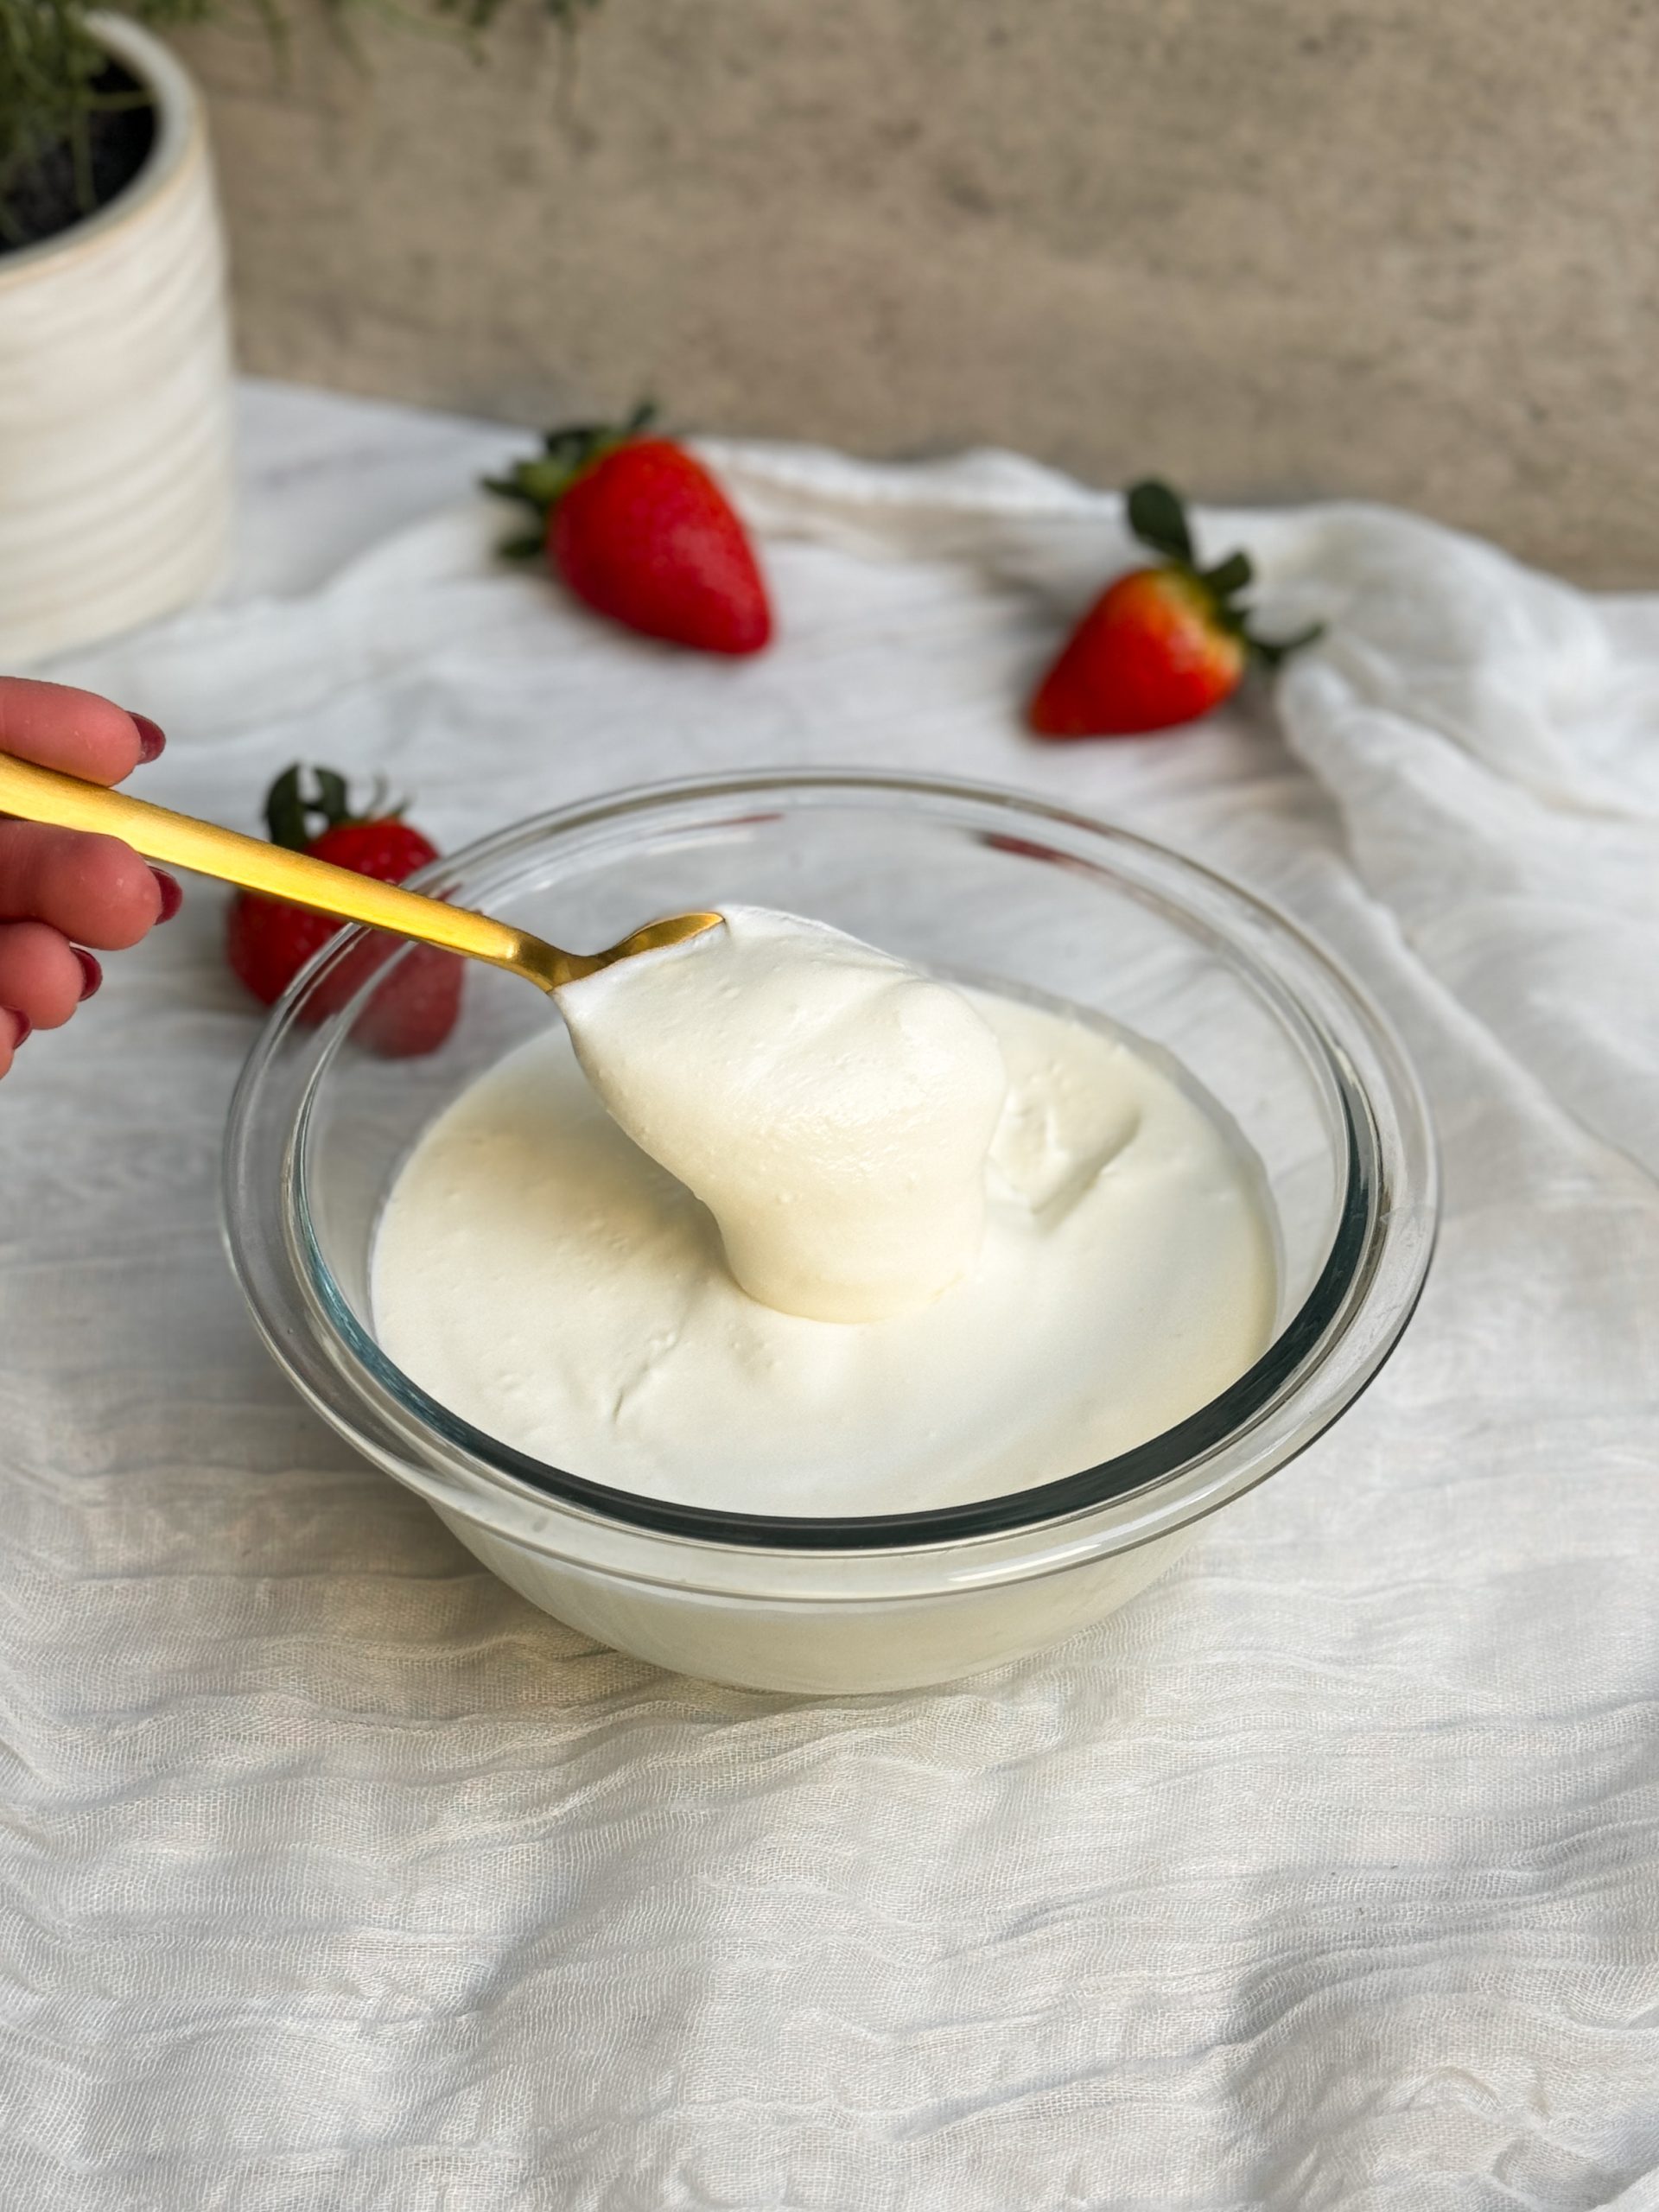 a glass bowl with homemade sour cream. sour cream is thick and creamy. a gold spoon is scooping up some sour cream to show how thick it is